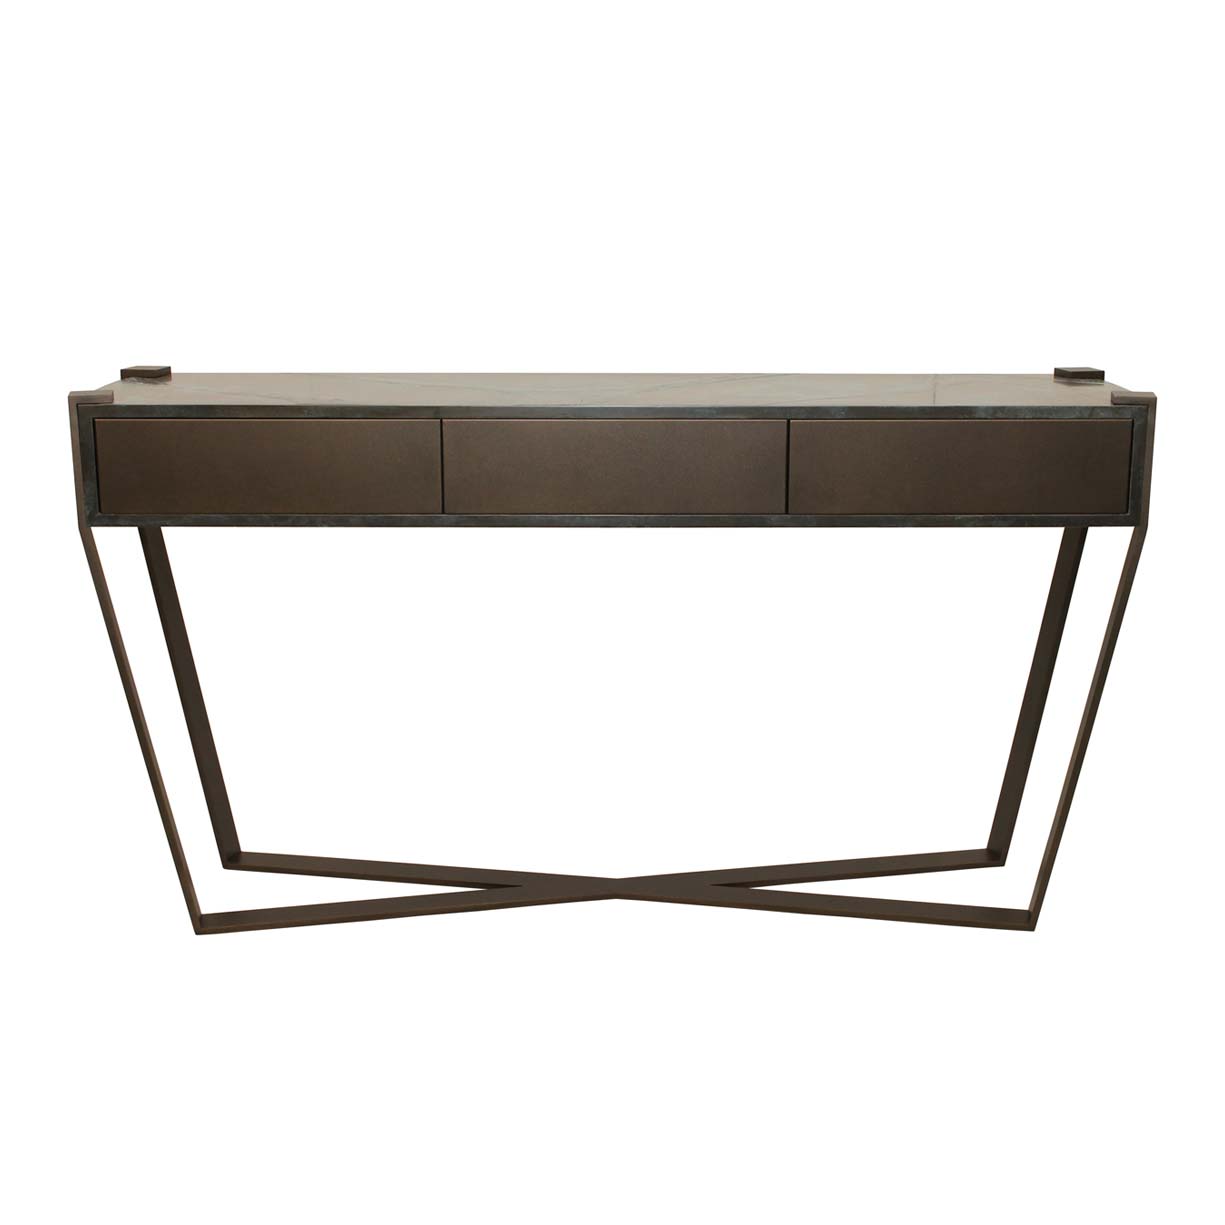 Panama console table with drawer unit